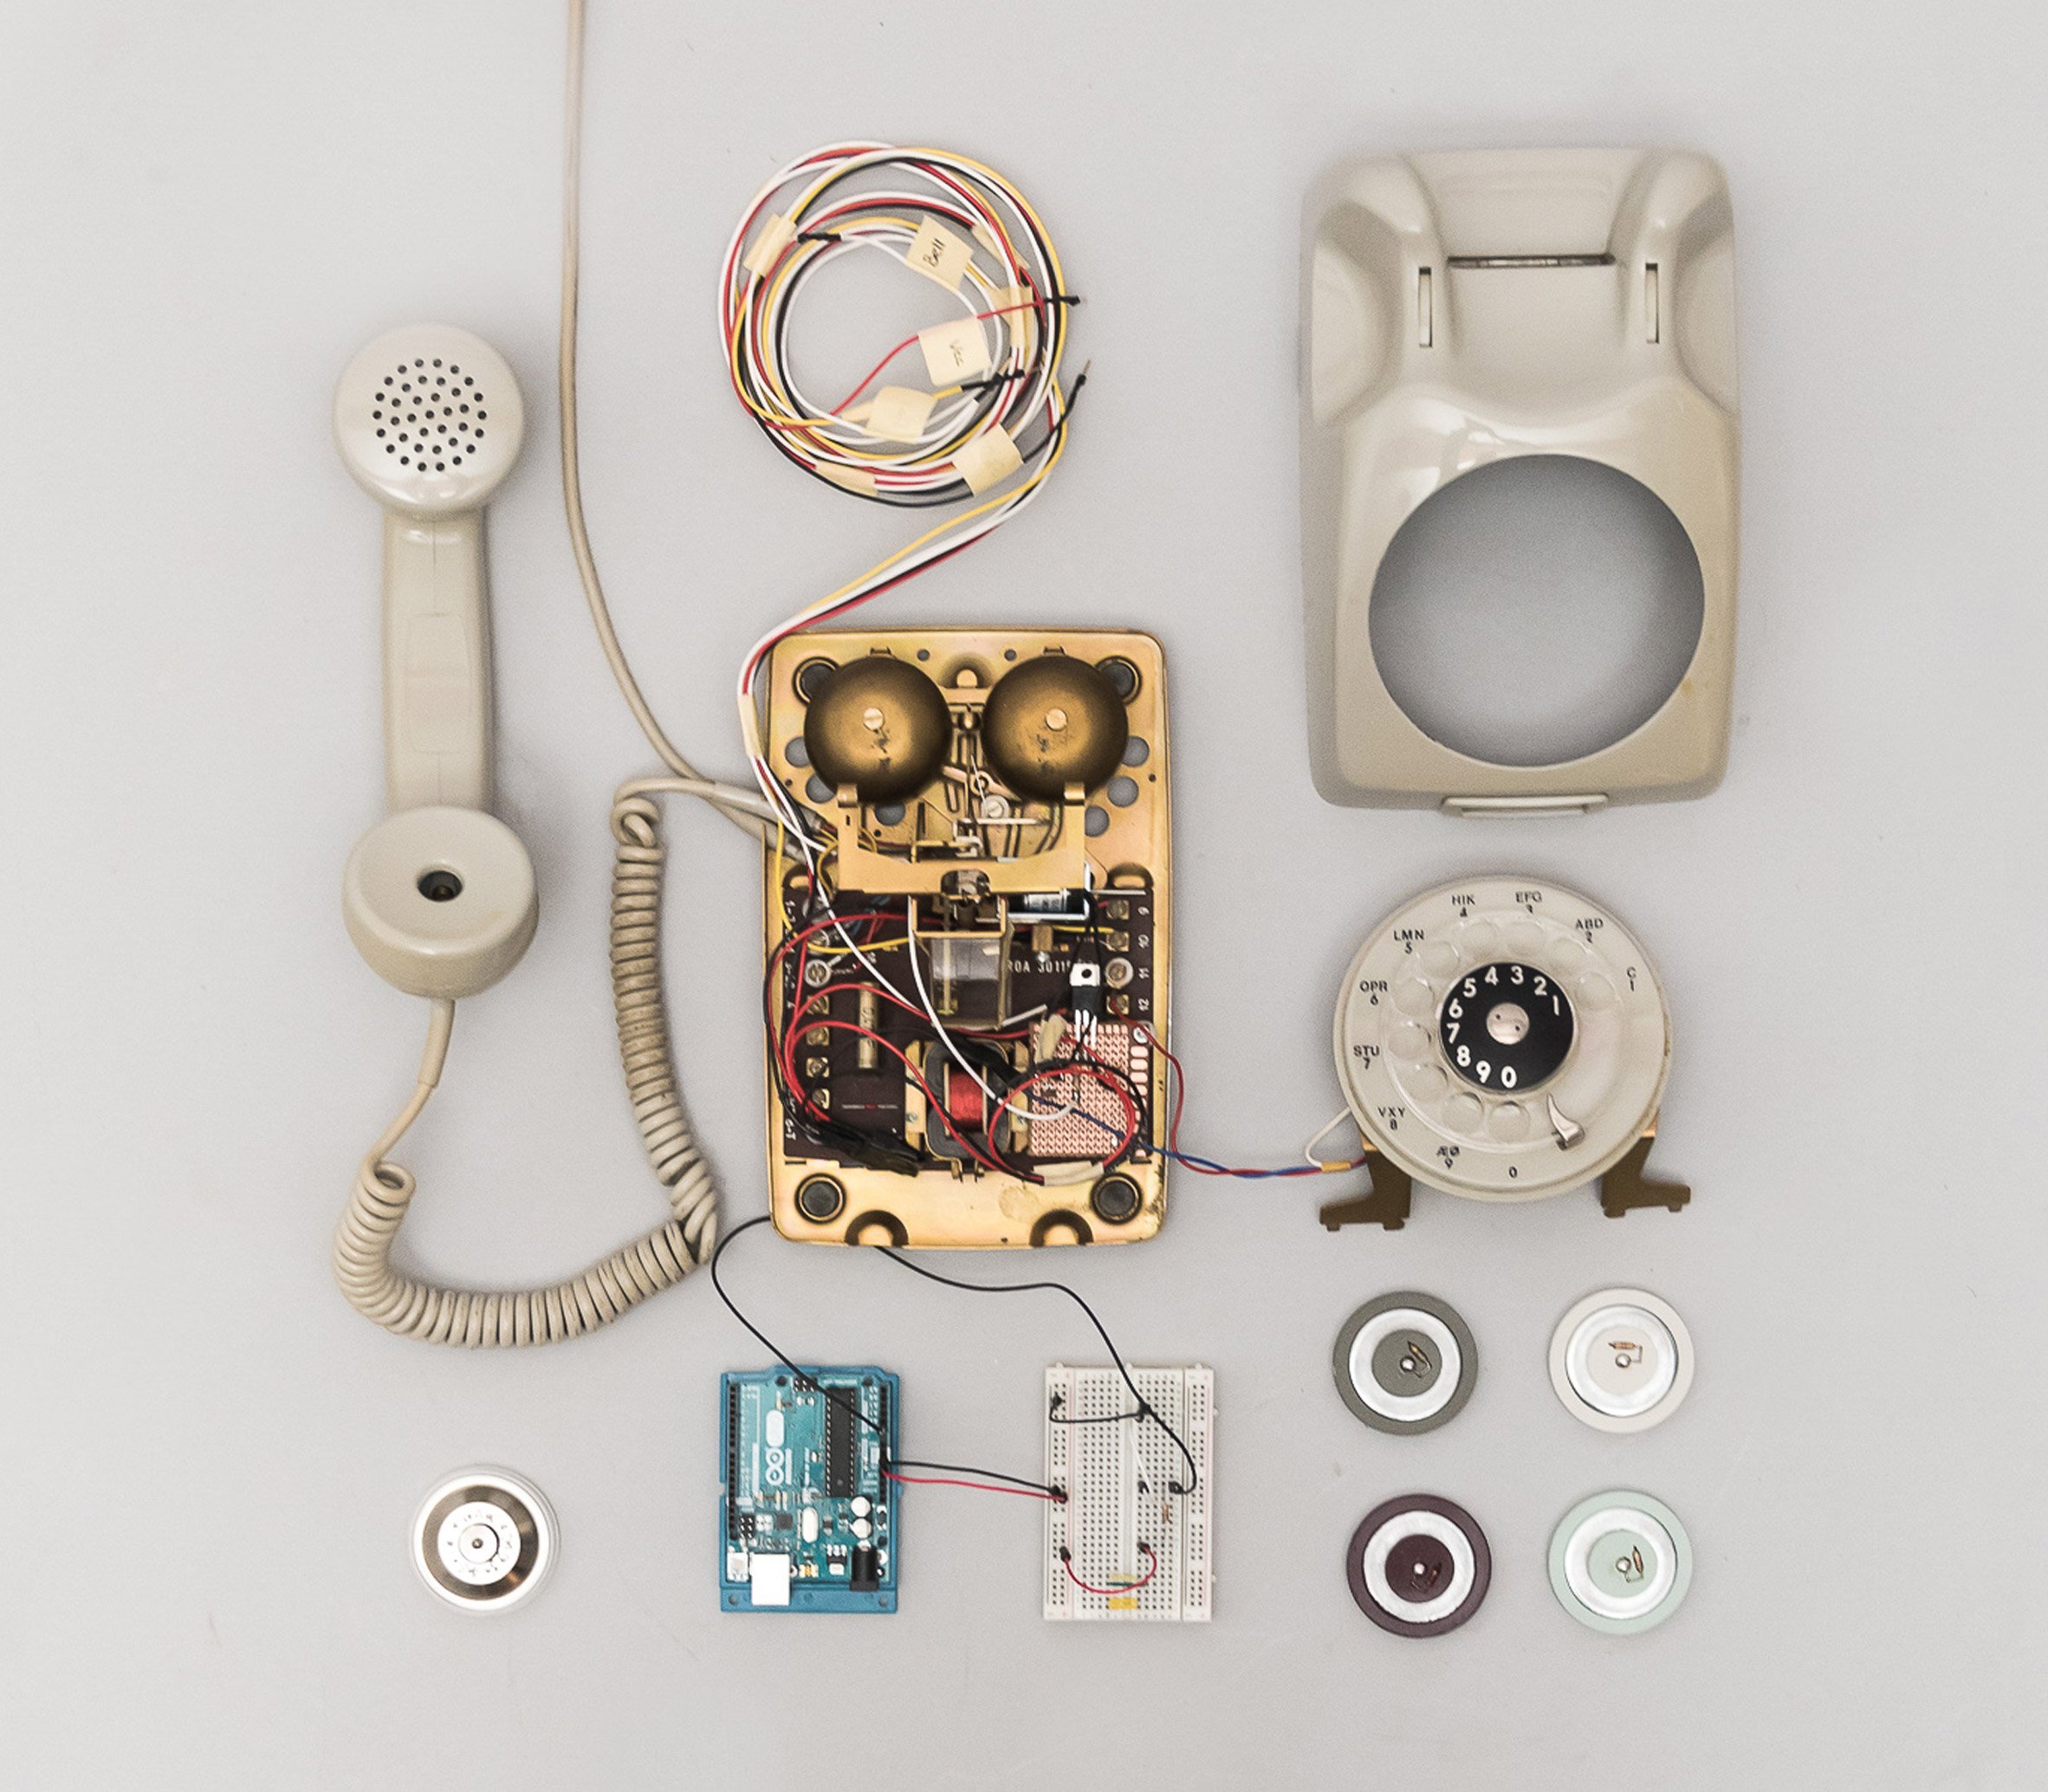 Danish Students Create A Rotary Phone That Dials Up The Internet